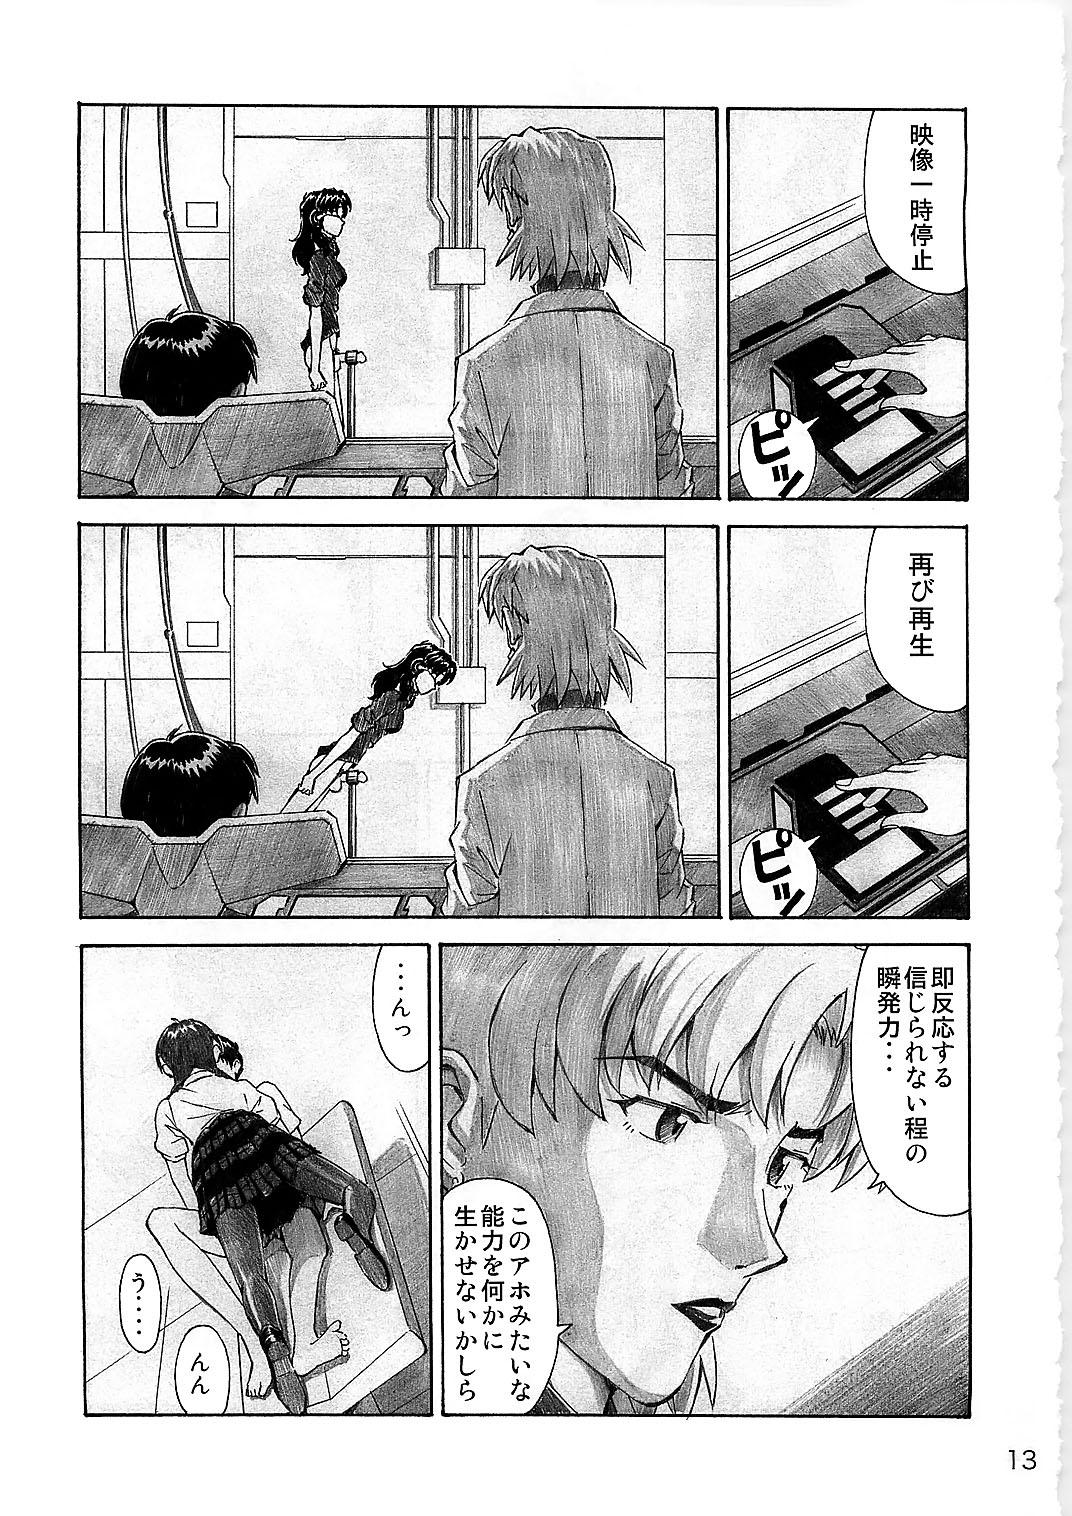 Amateurporn Wanna Try? - Neon genesis evangelion Ejaculation - Page 13